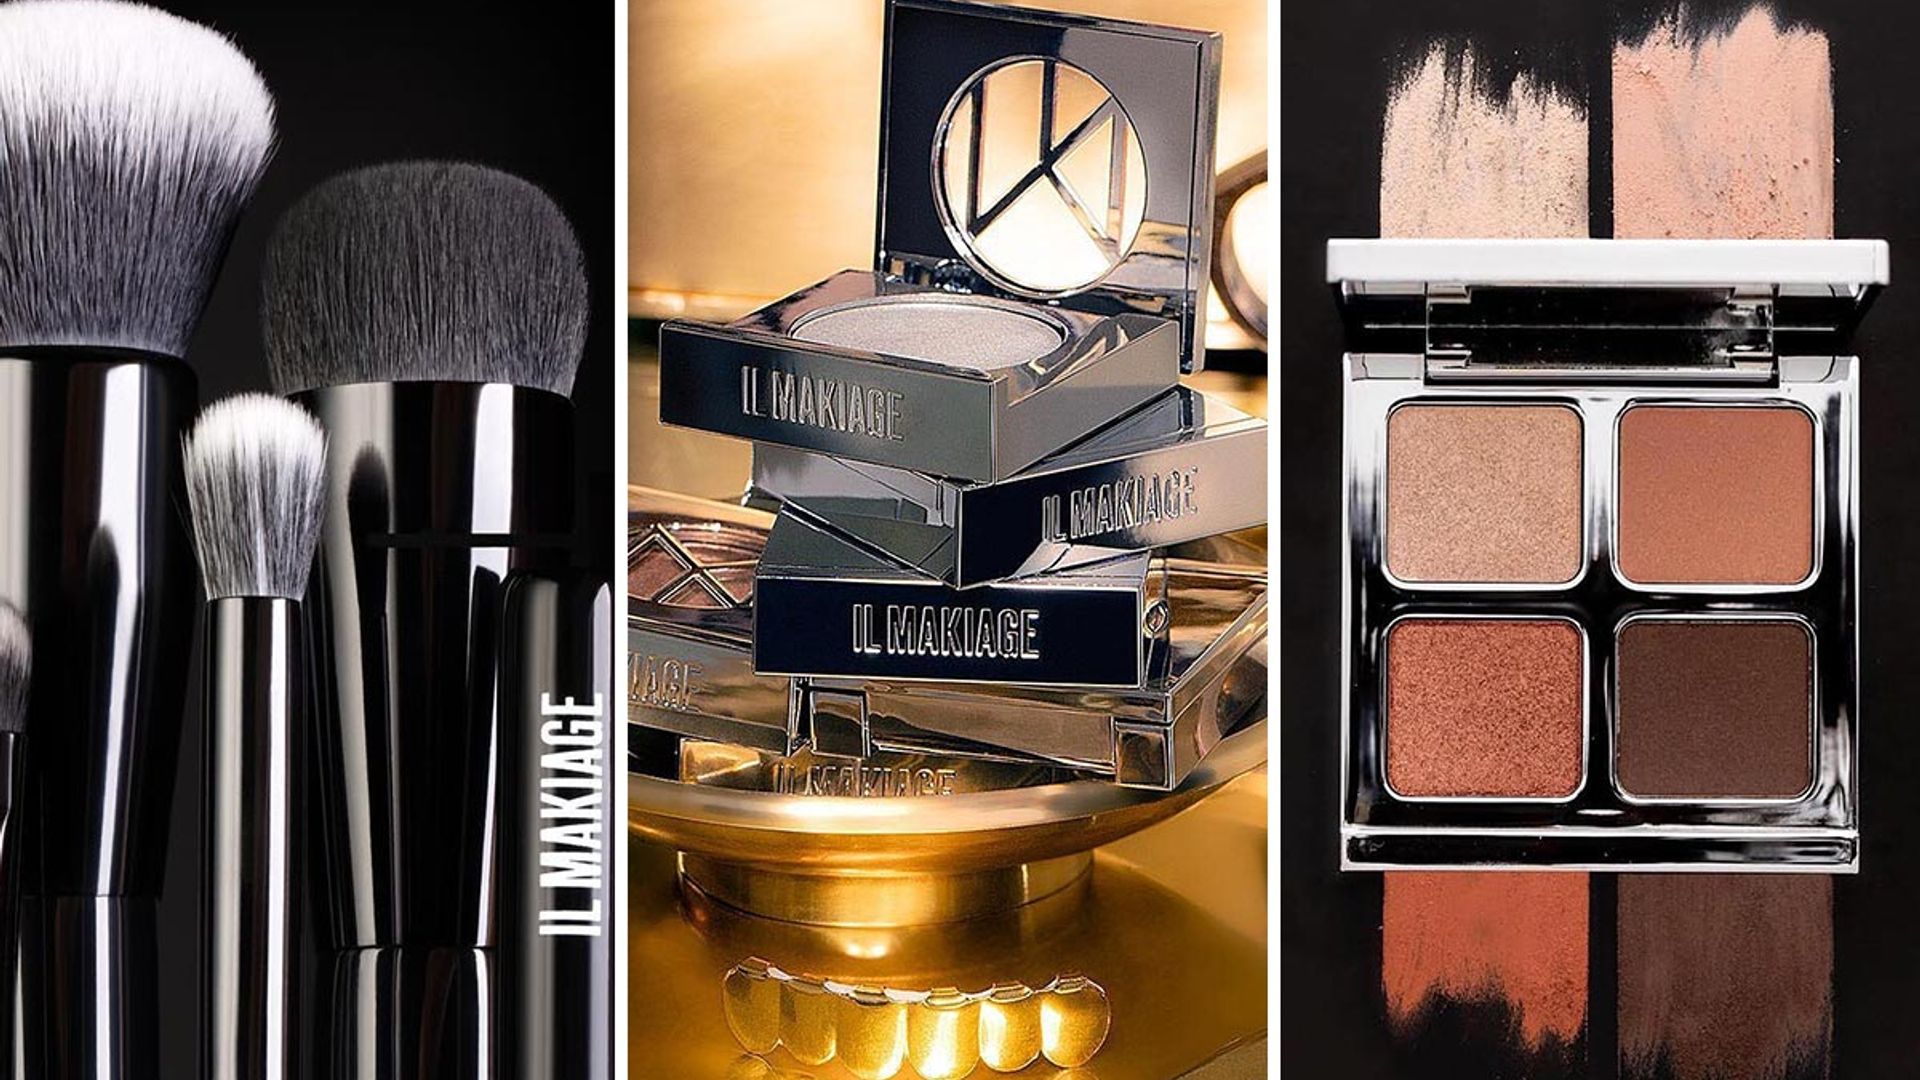 Il Makiage makeup is huge in the US & now it's here in the UK - these are the most talked-about products